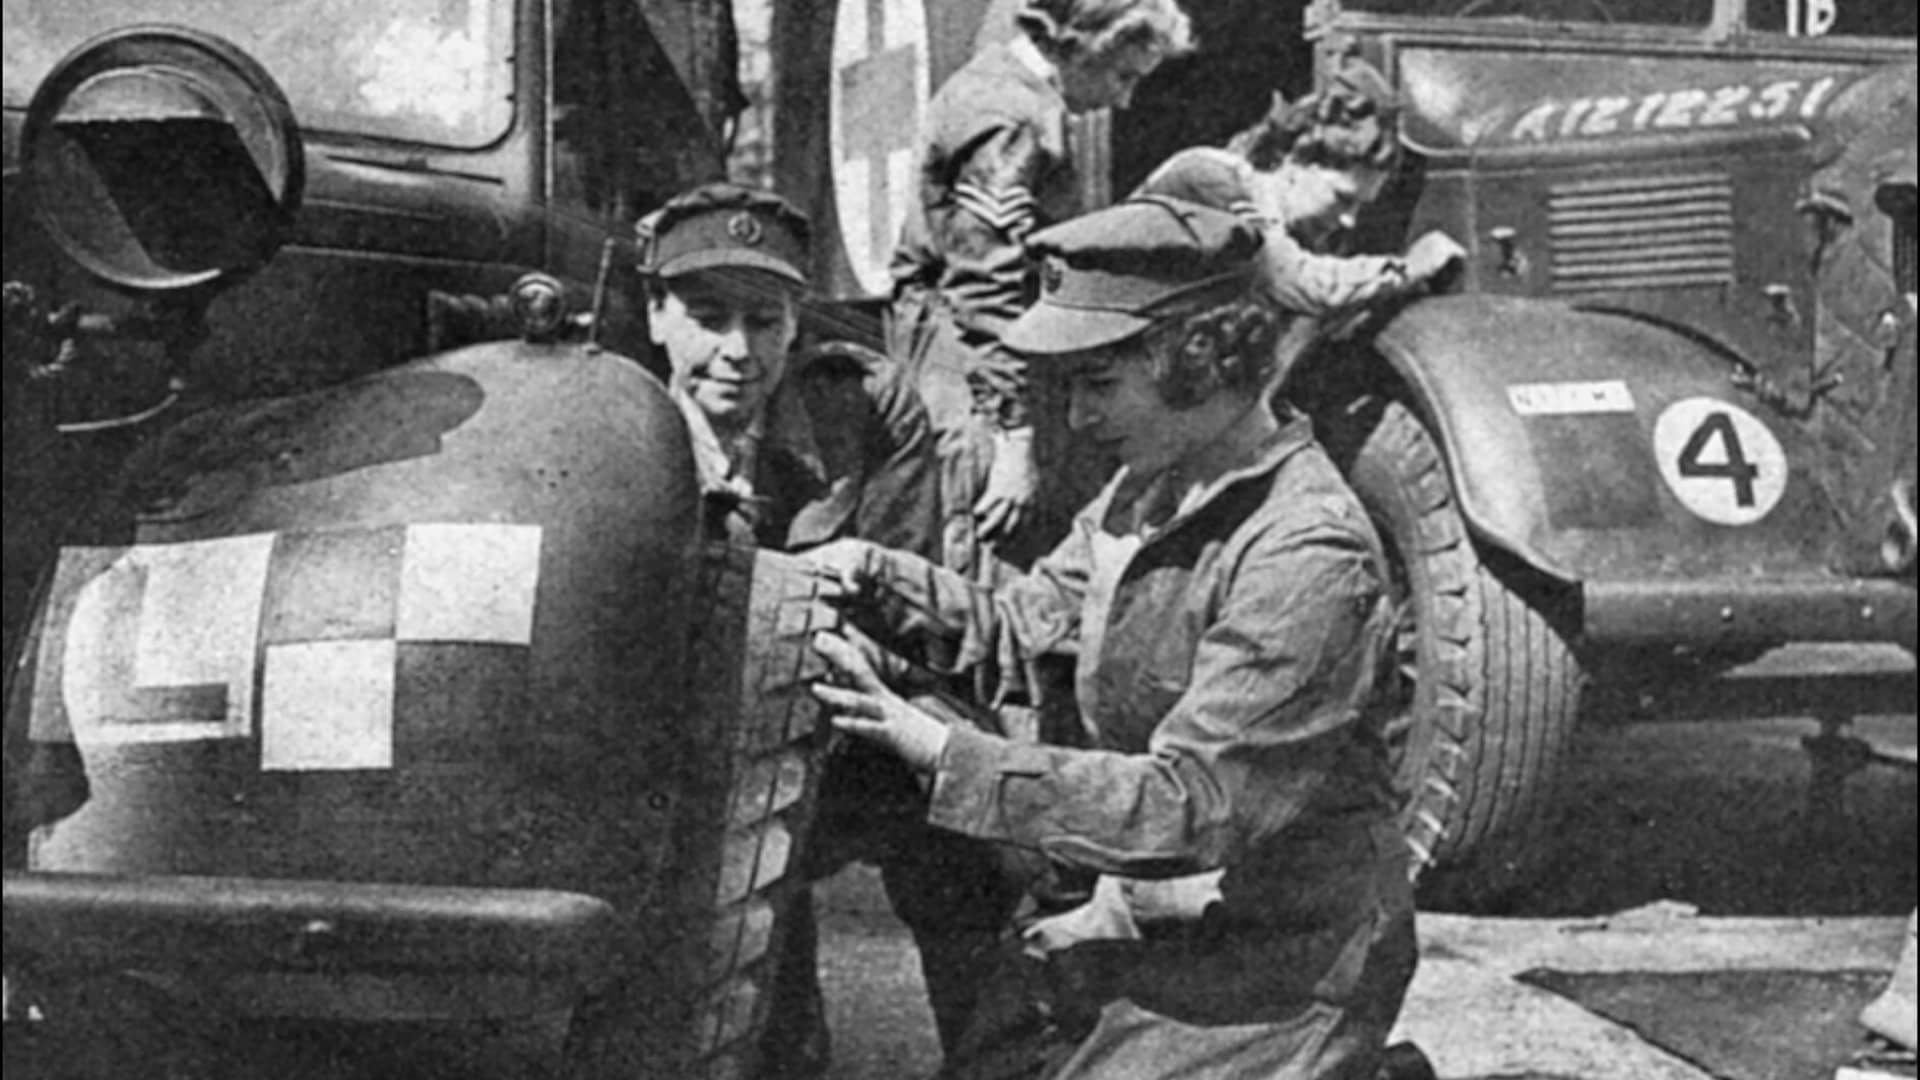 Then-Princess Elizabeth learns how to change a car tire as an auxiliary officer of the English Army, 1945.